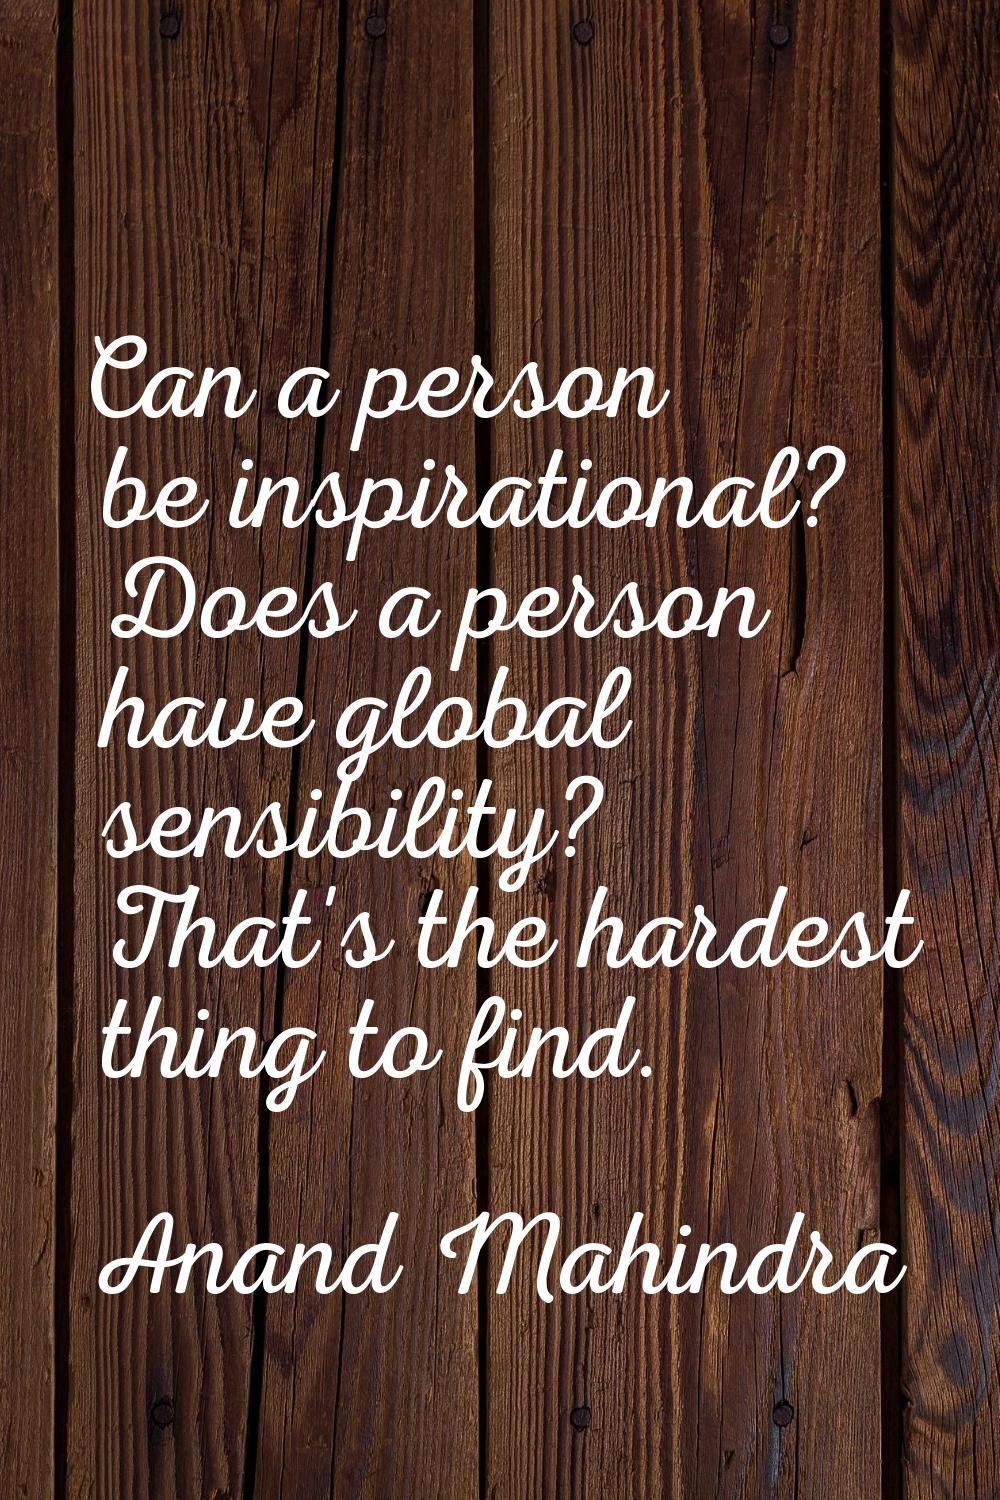 Can a person be inspirational? Does a person have global sensibility? That's the hardest thing to f